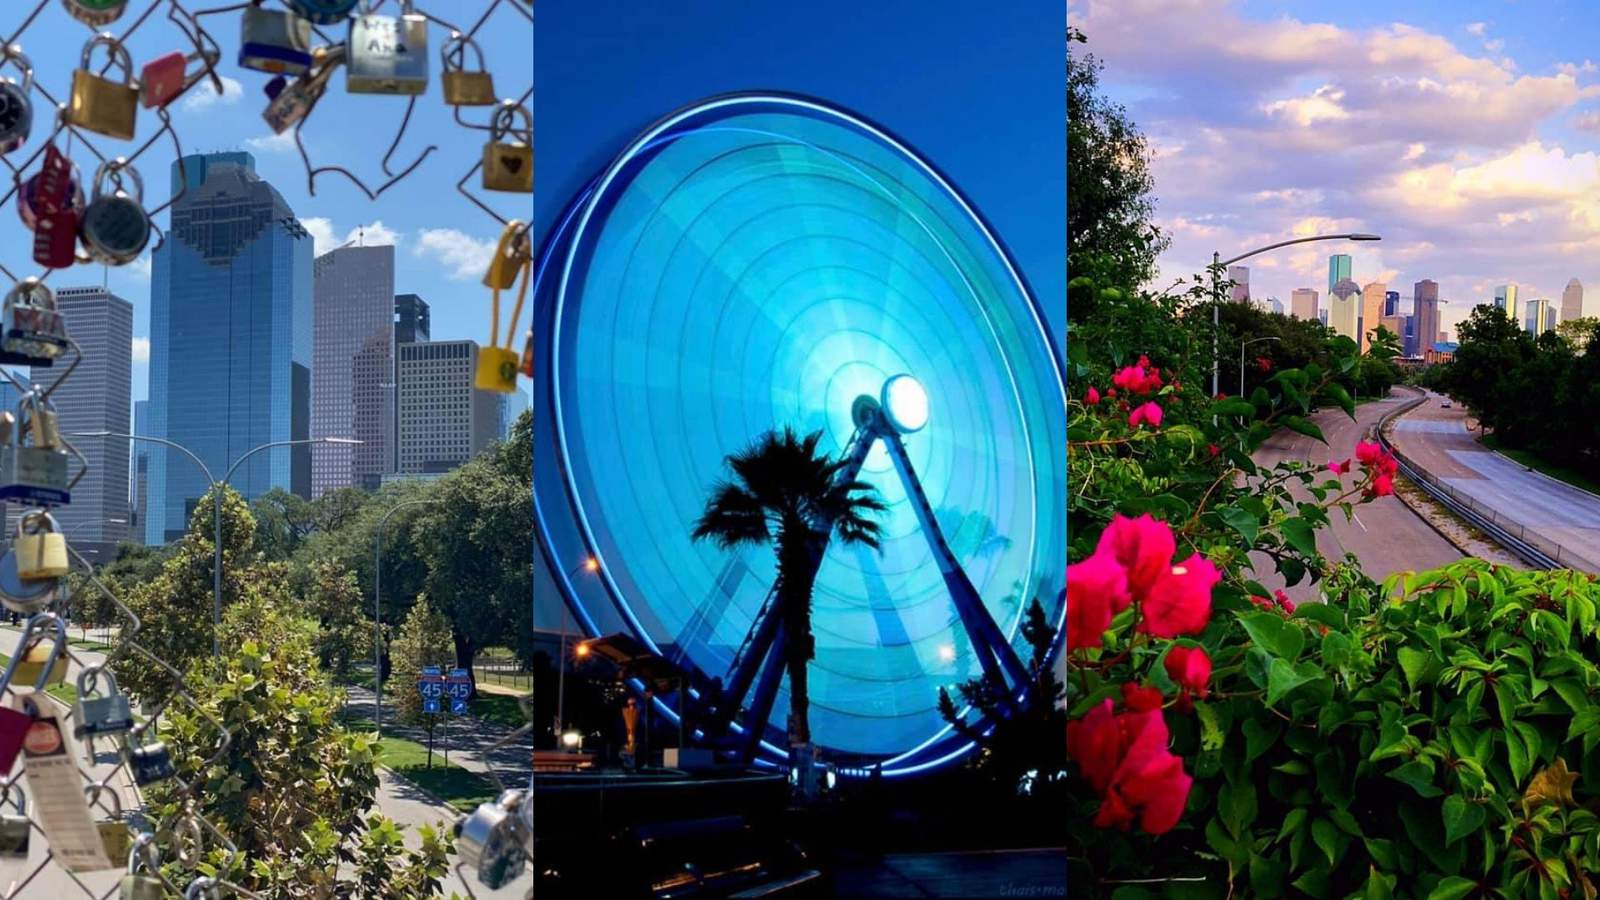 GALLERY: Houston residents share the stunning photos they’ve taken of the Houston area